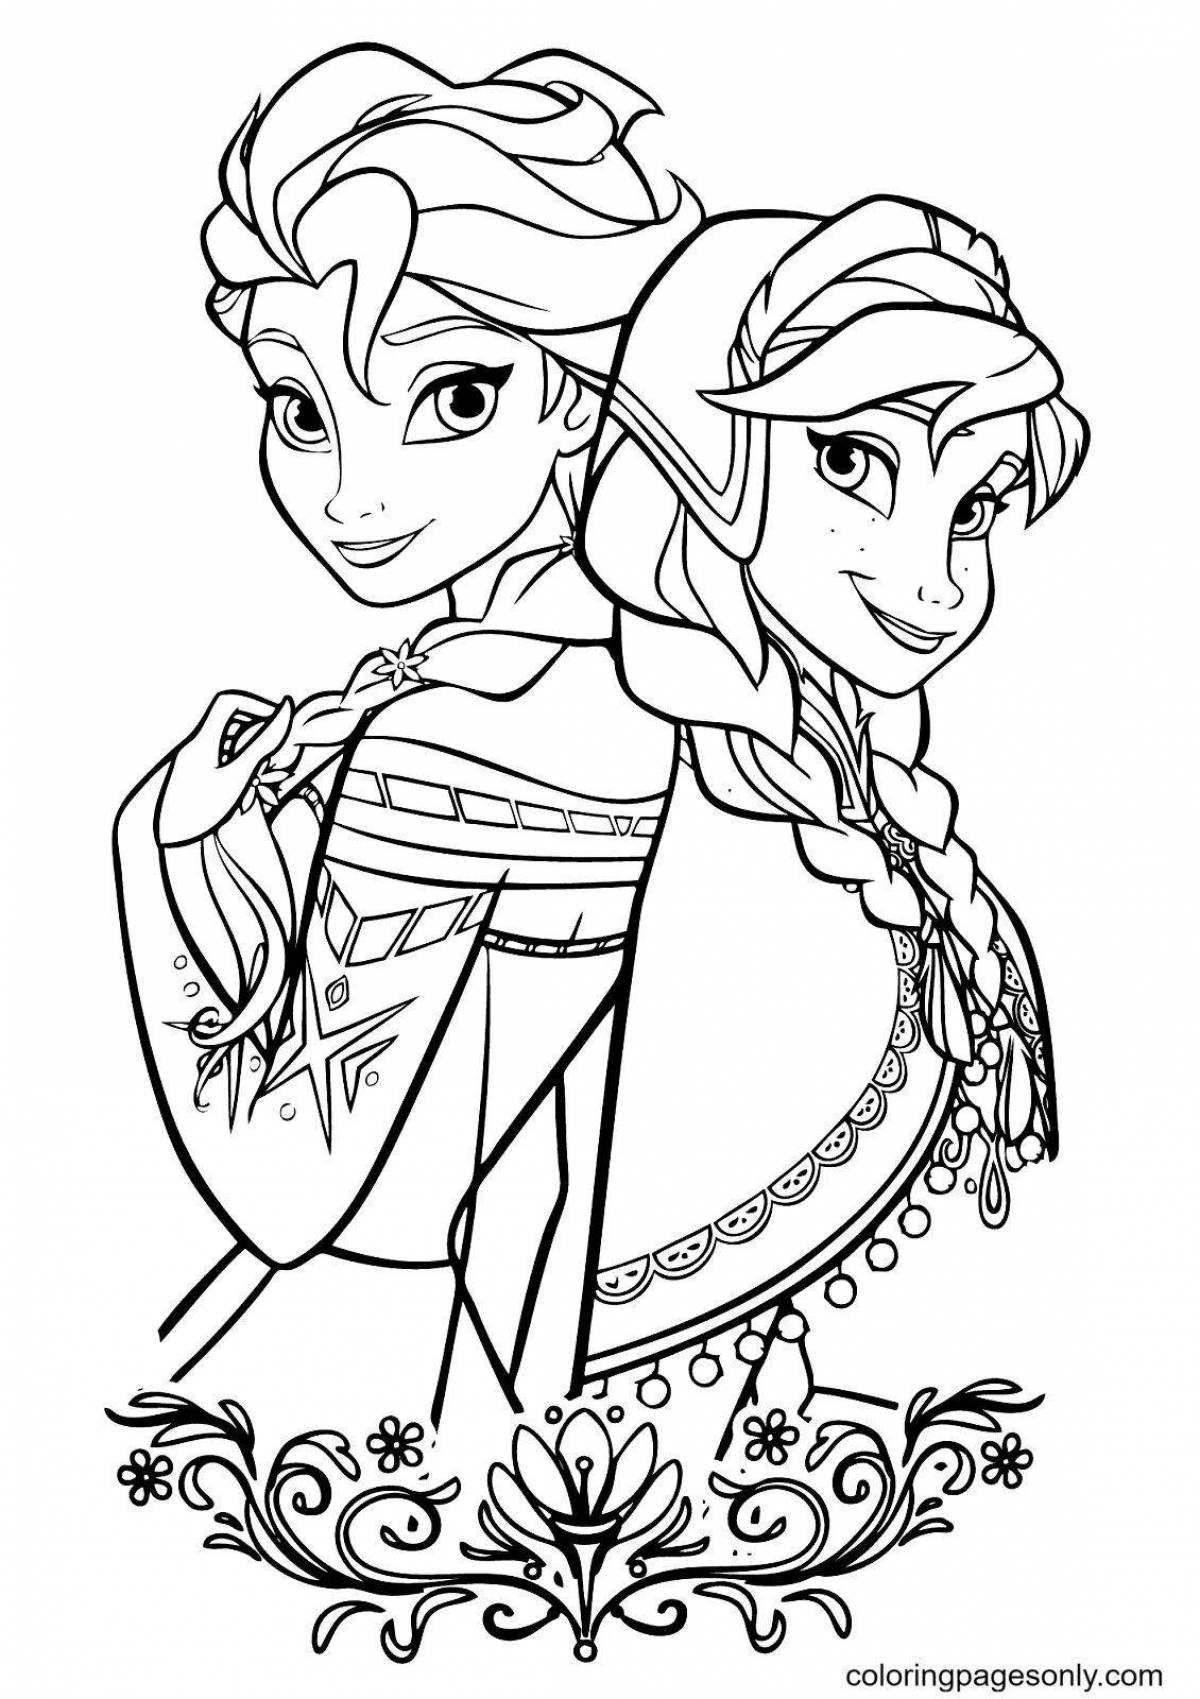 Coloring page graceful anna princess